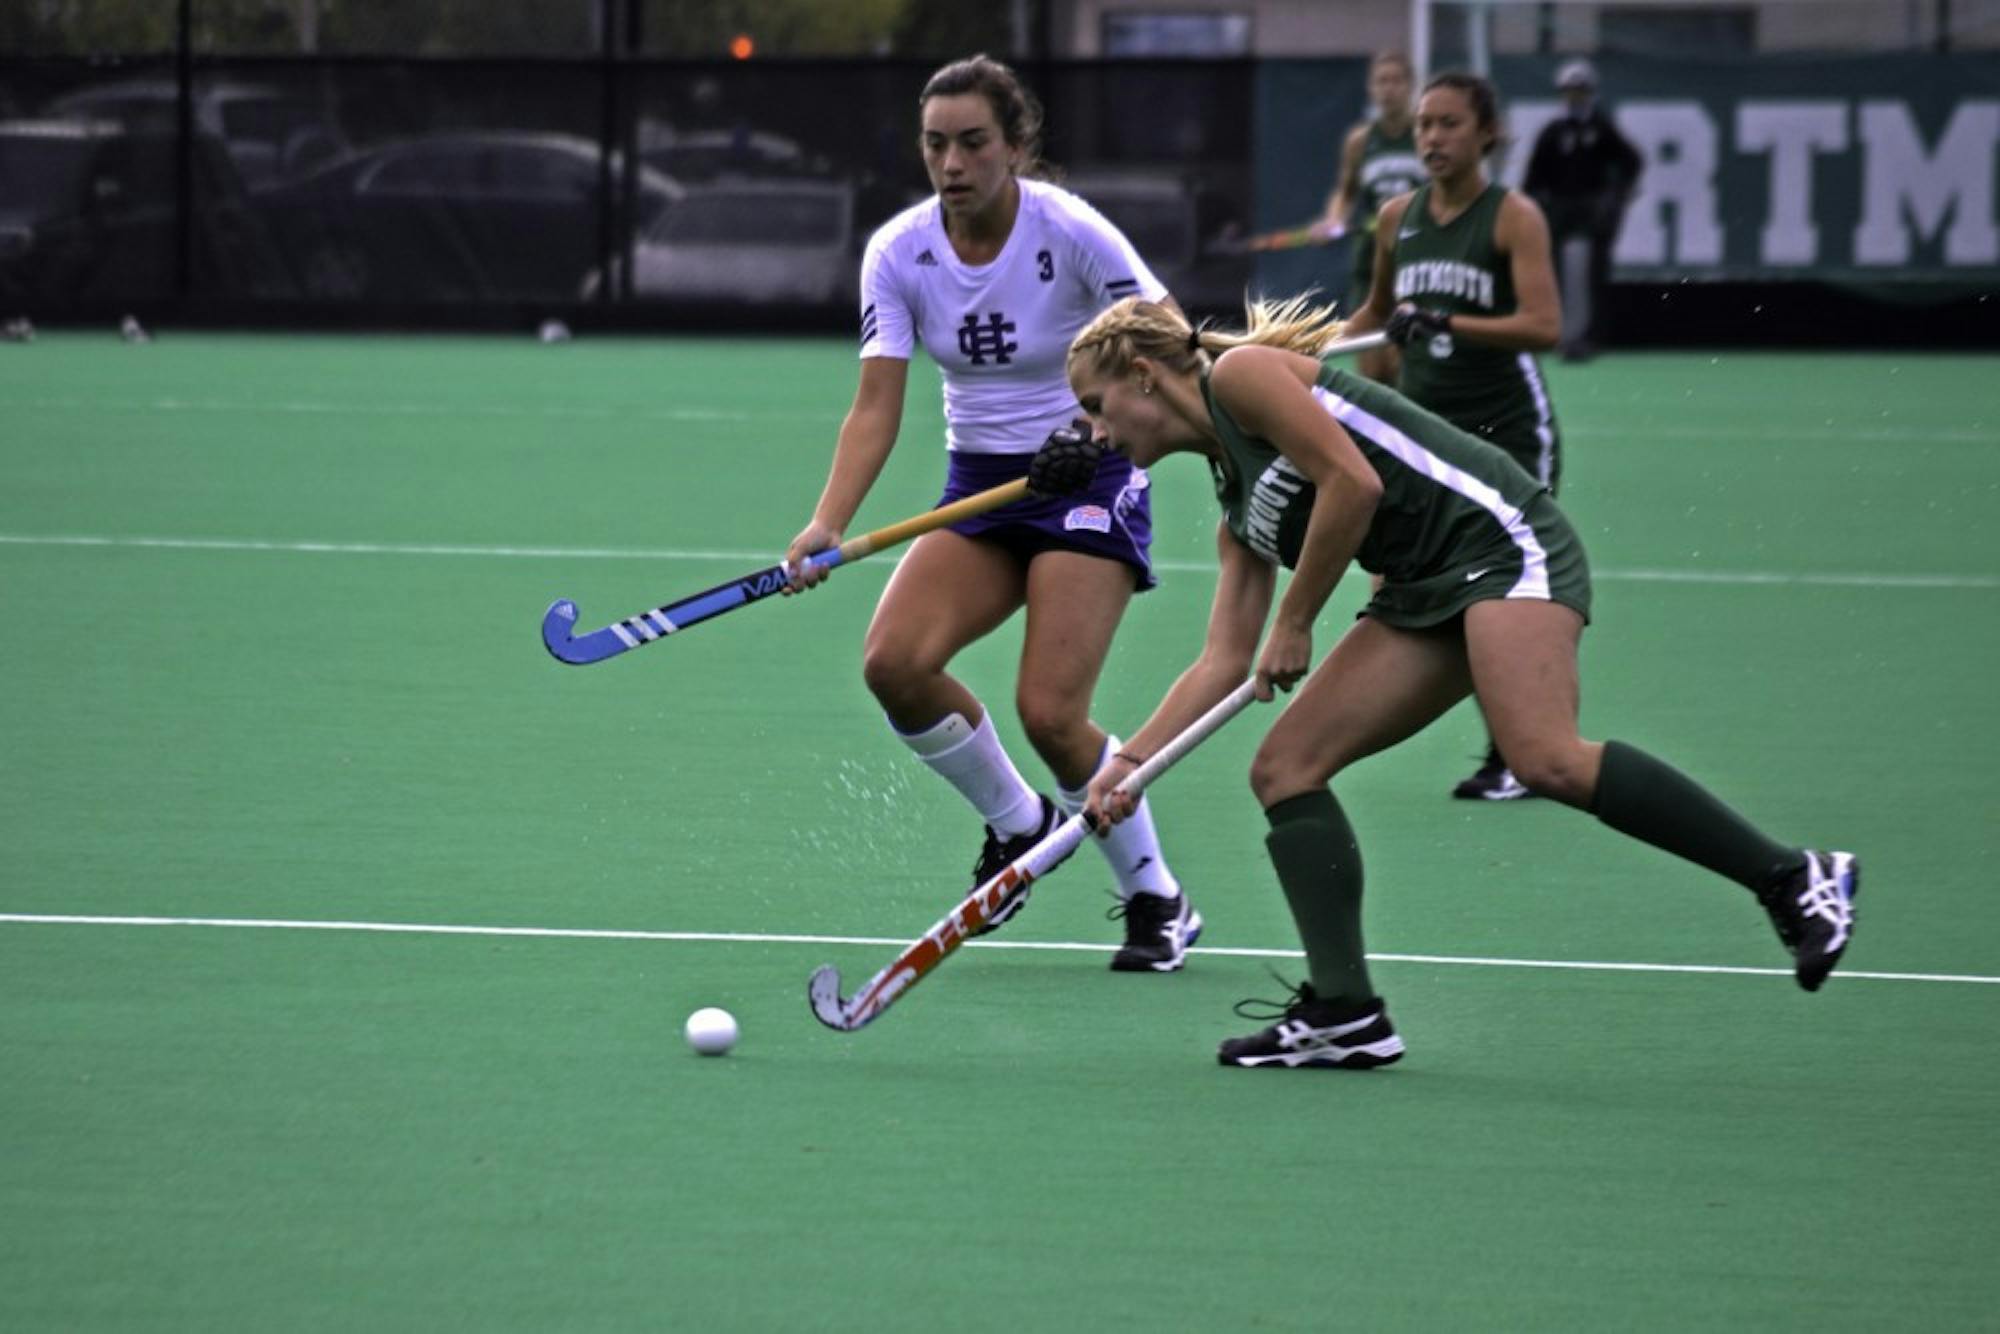 Following a two-game win streak that included a 5-4 win over Holy Cross, the field hockey team has now lost two straight.